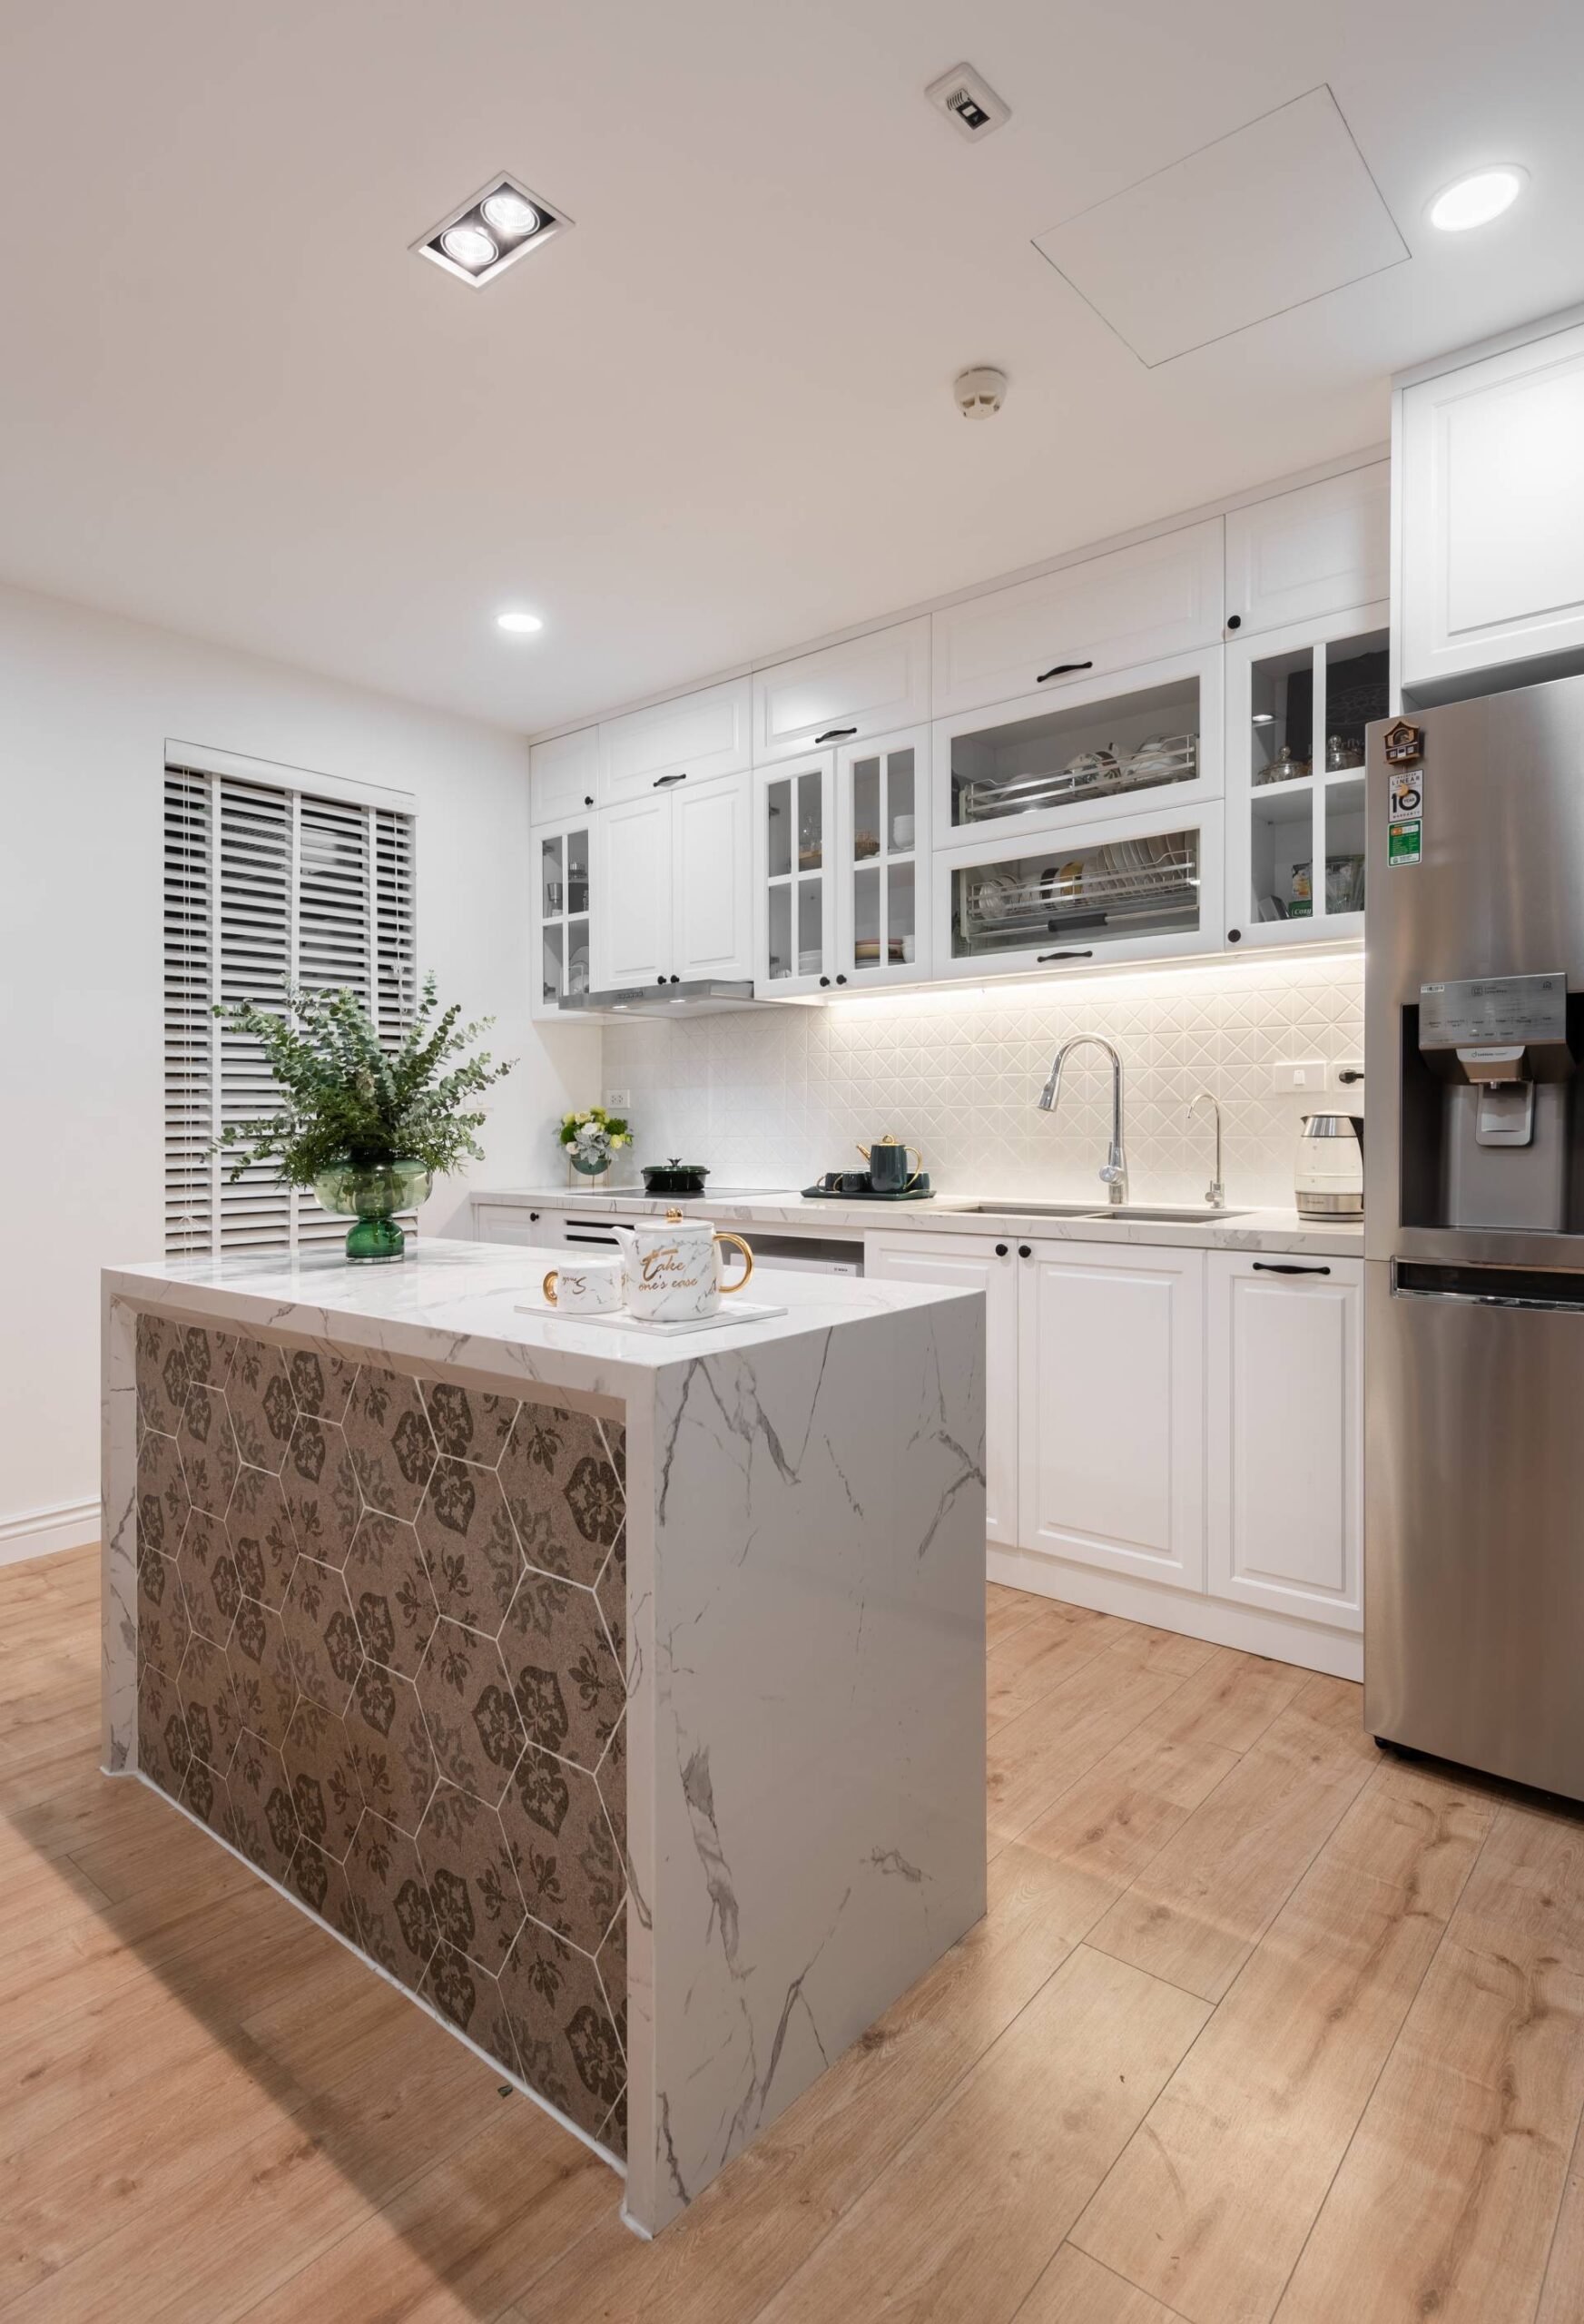 The kitchen area is small. Architects have chosen neutral light color tones such as white, metallic, light brown ... to make this space look more spacious, airy, bringing happy cooking moments.